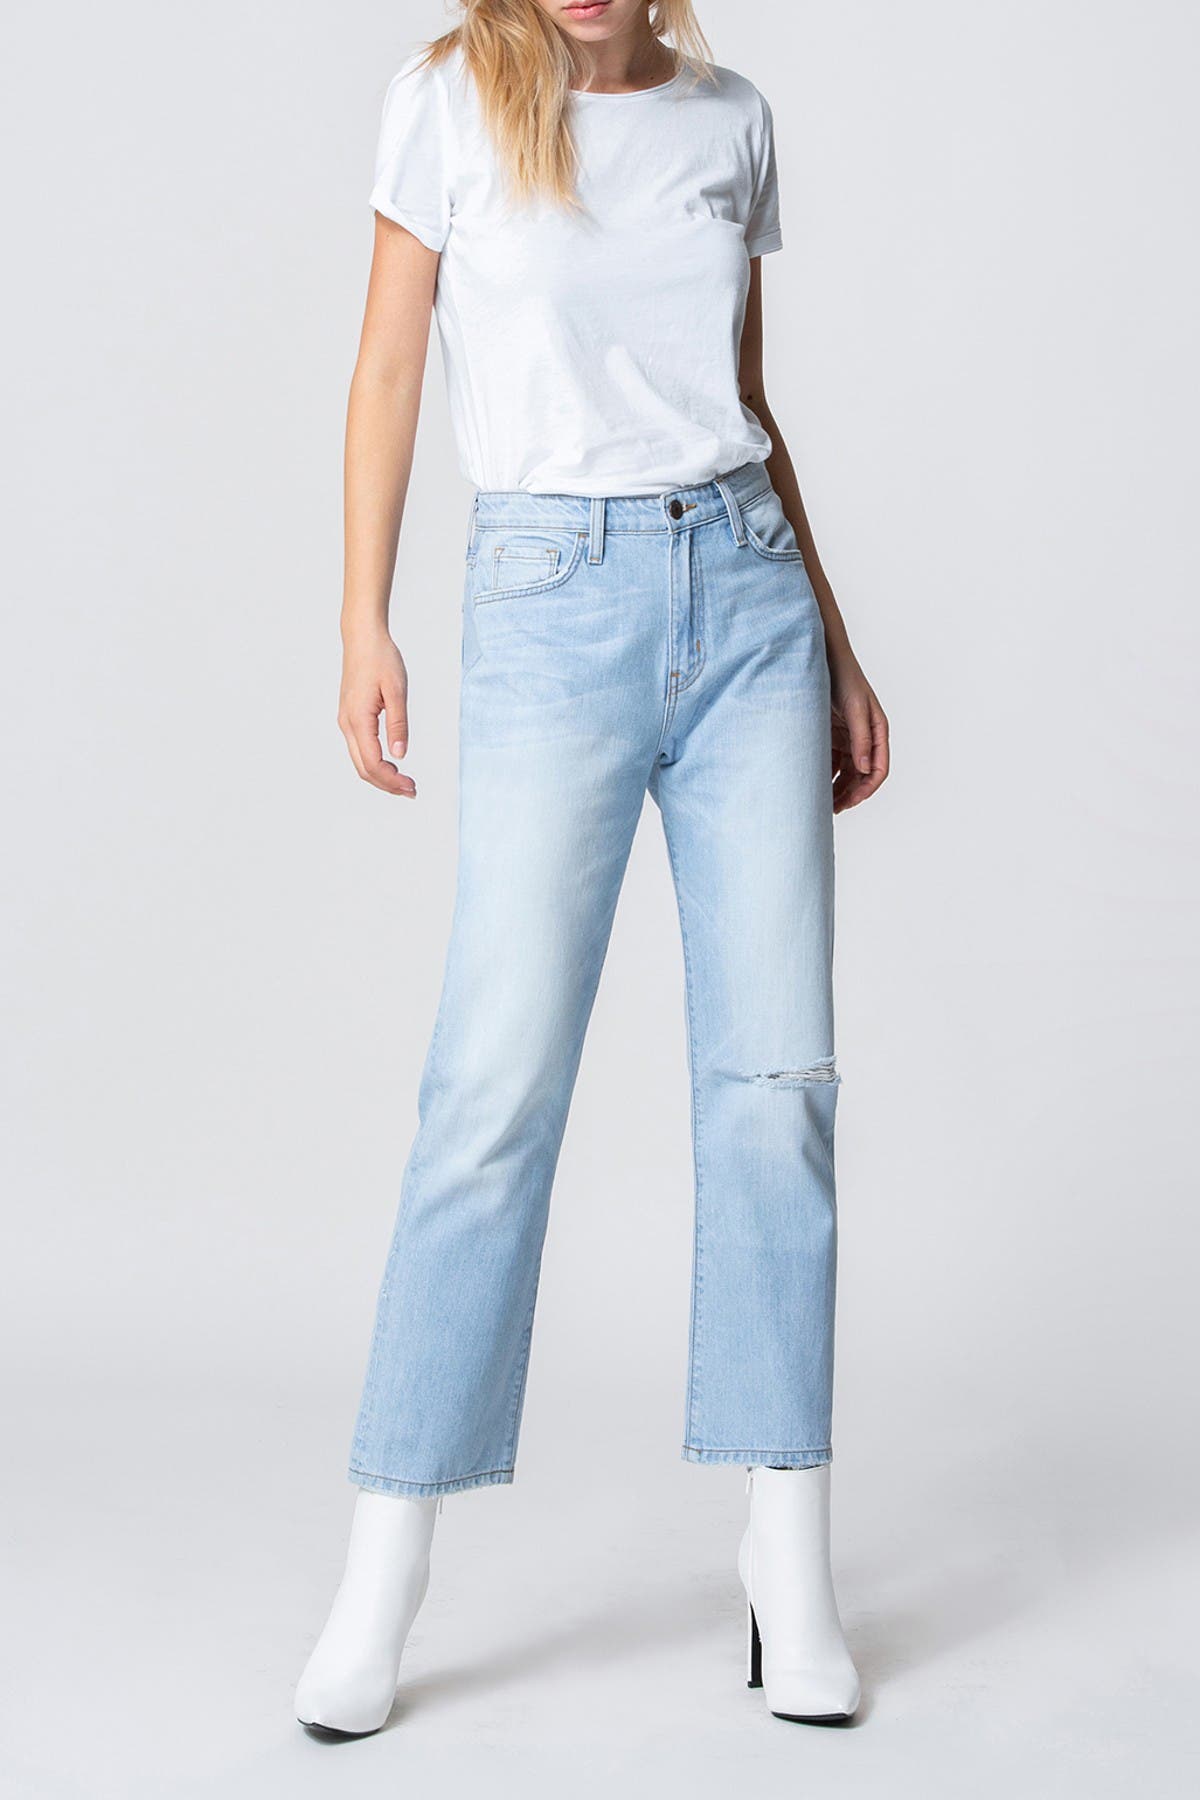 flying monkey high rise jeans